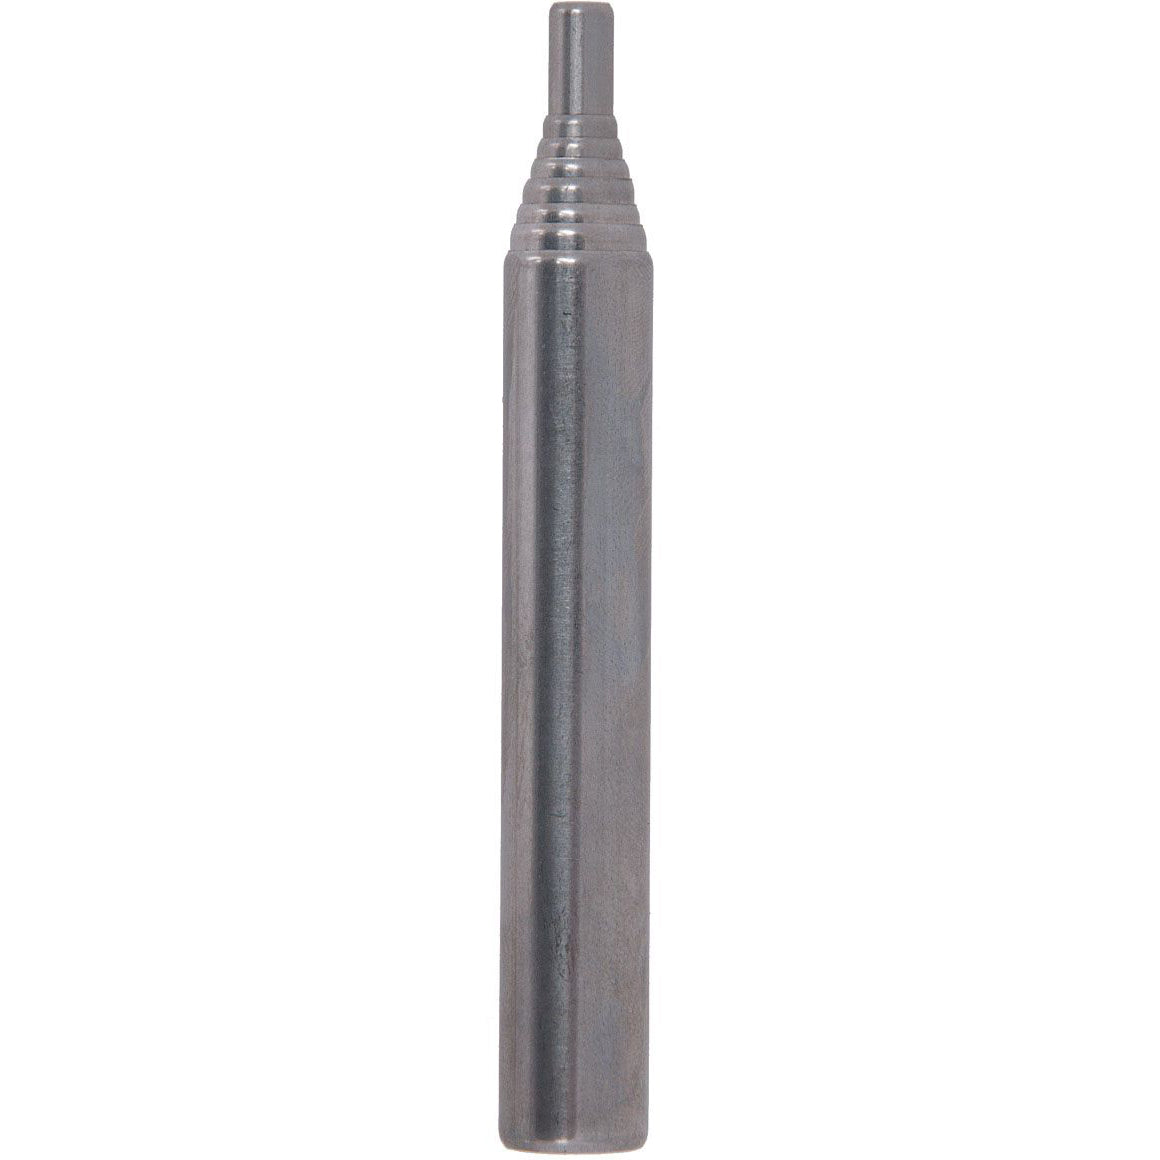 POCKET BELLOWS COLLAPSIBLE TOOL